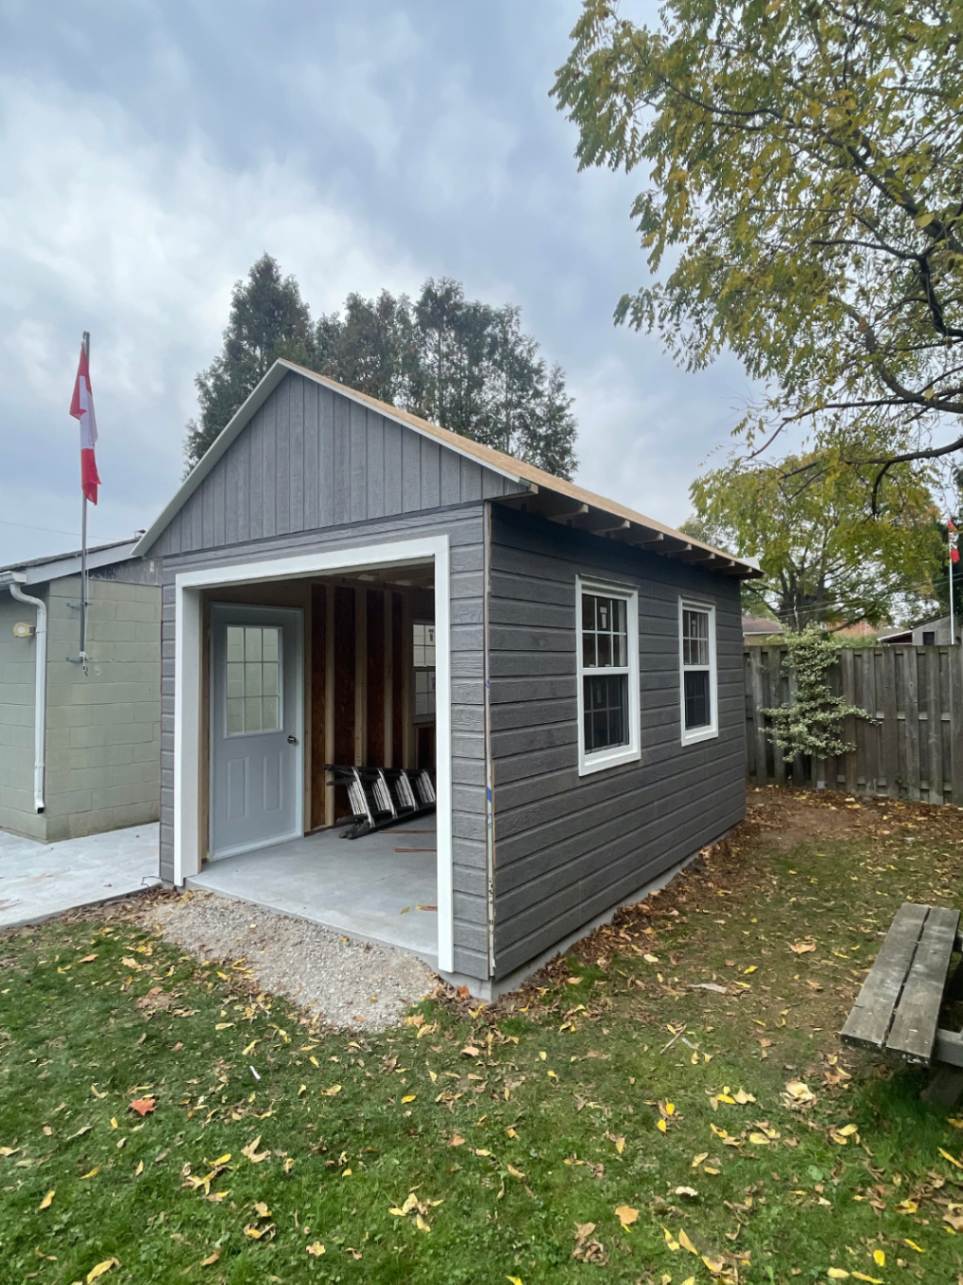 Front view of 10’ x 10' Palmerston Garden Shed located in Hamilton, Ontario – Summerwood Product